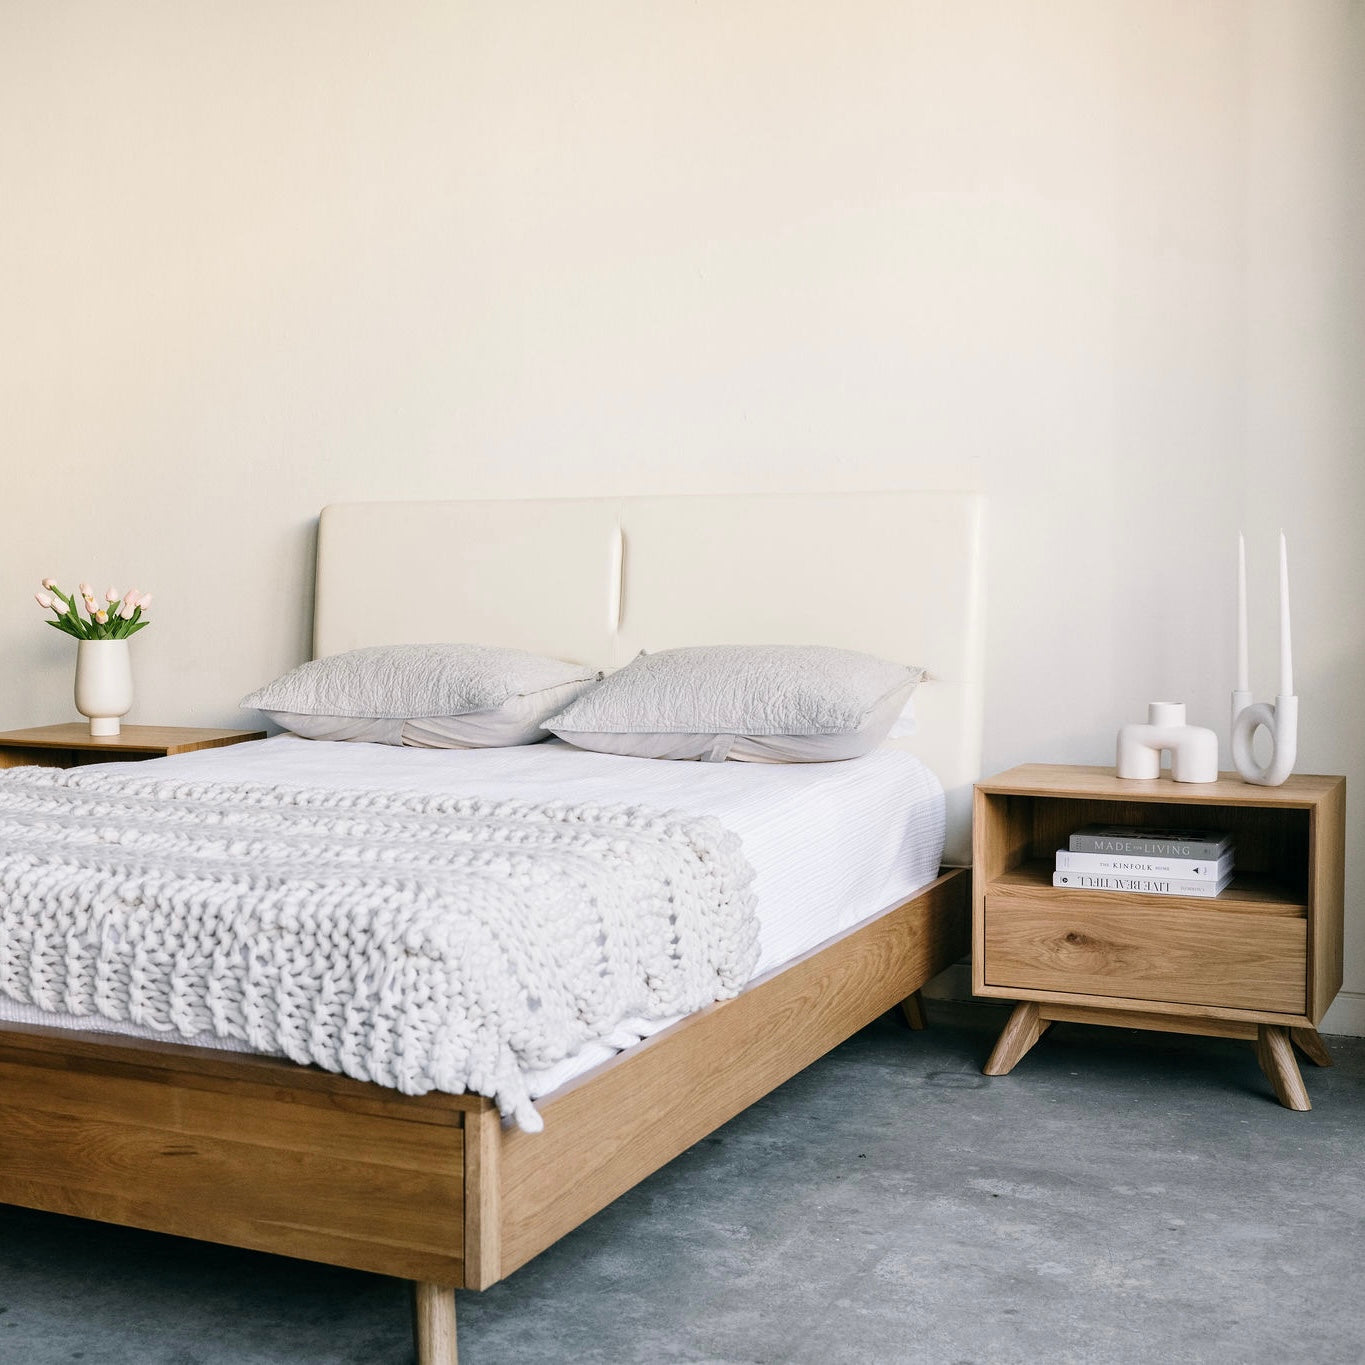 Mim Concept best Modern furniture stores in Toronto, Ottawa and Mississauga to sell modern contemporary bedroom furniture and condo furniture Italian leather headboard bed Low profile platform storage bed solid oak wood